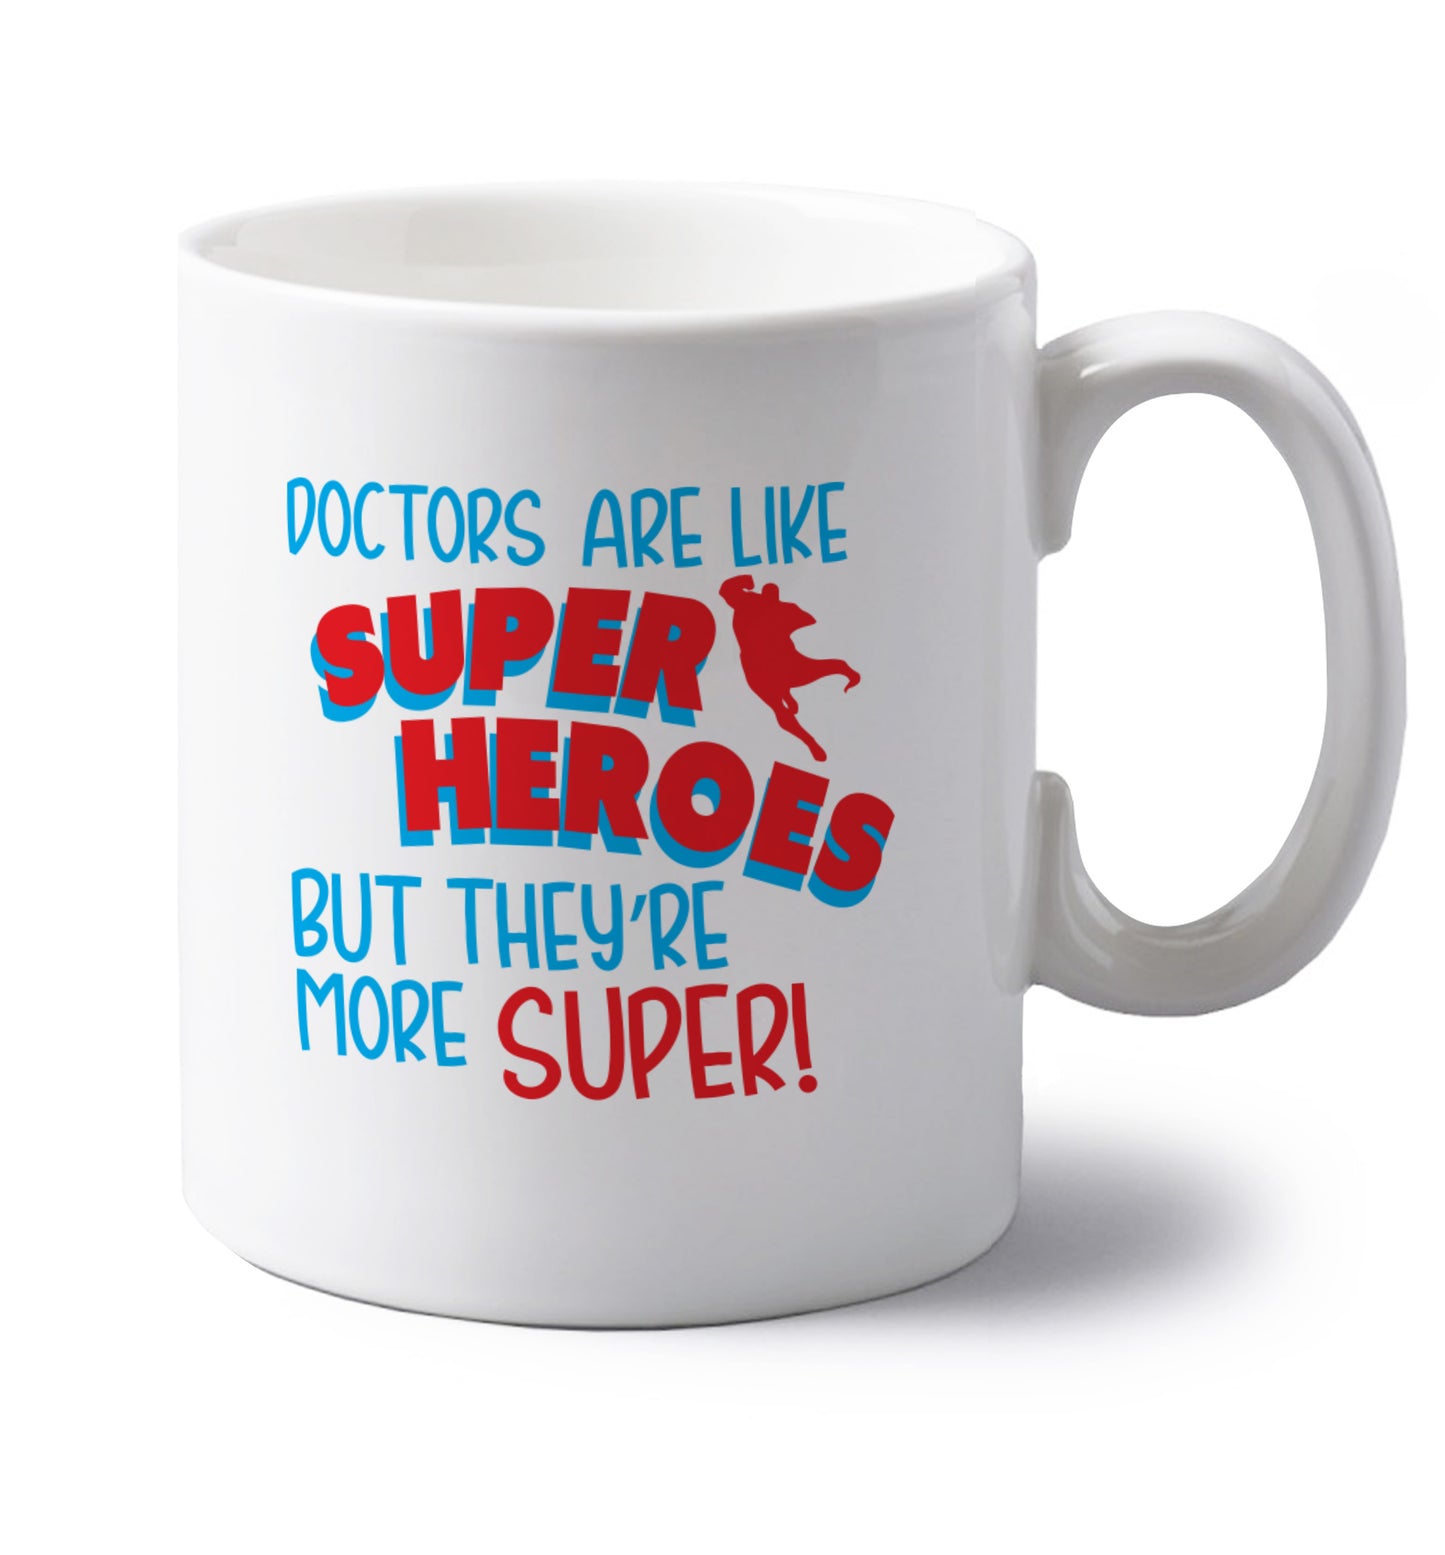 Doctors are like superheros but they're more super left handed white ceramic mug 